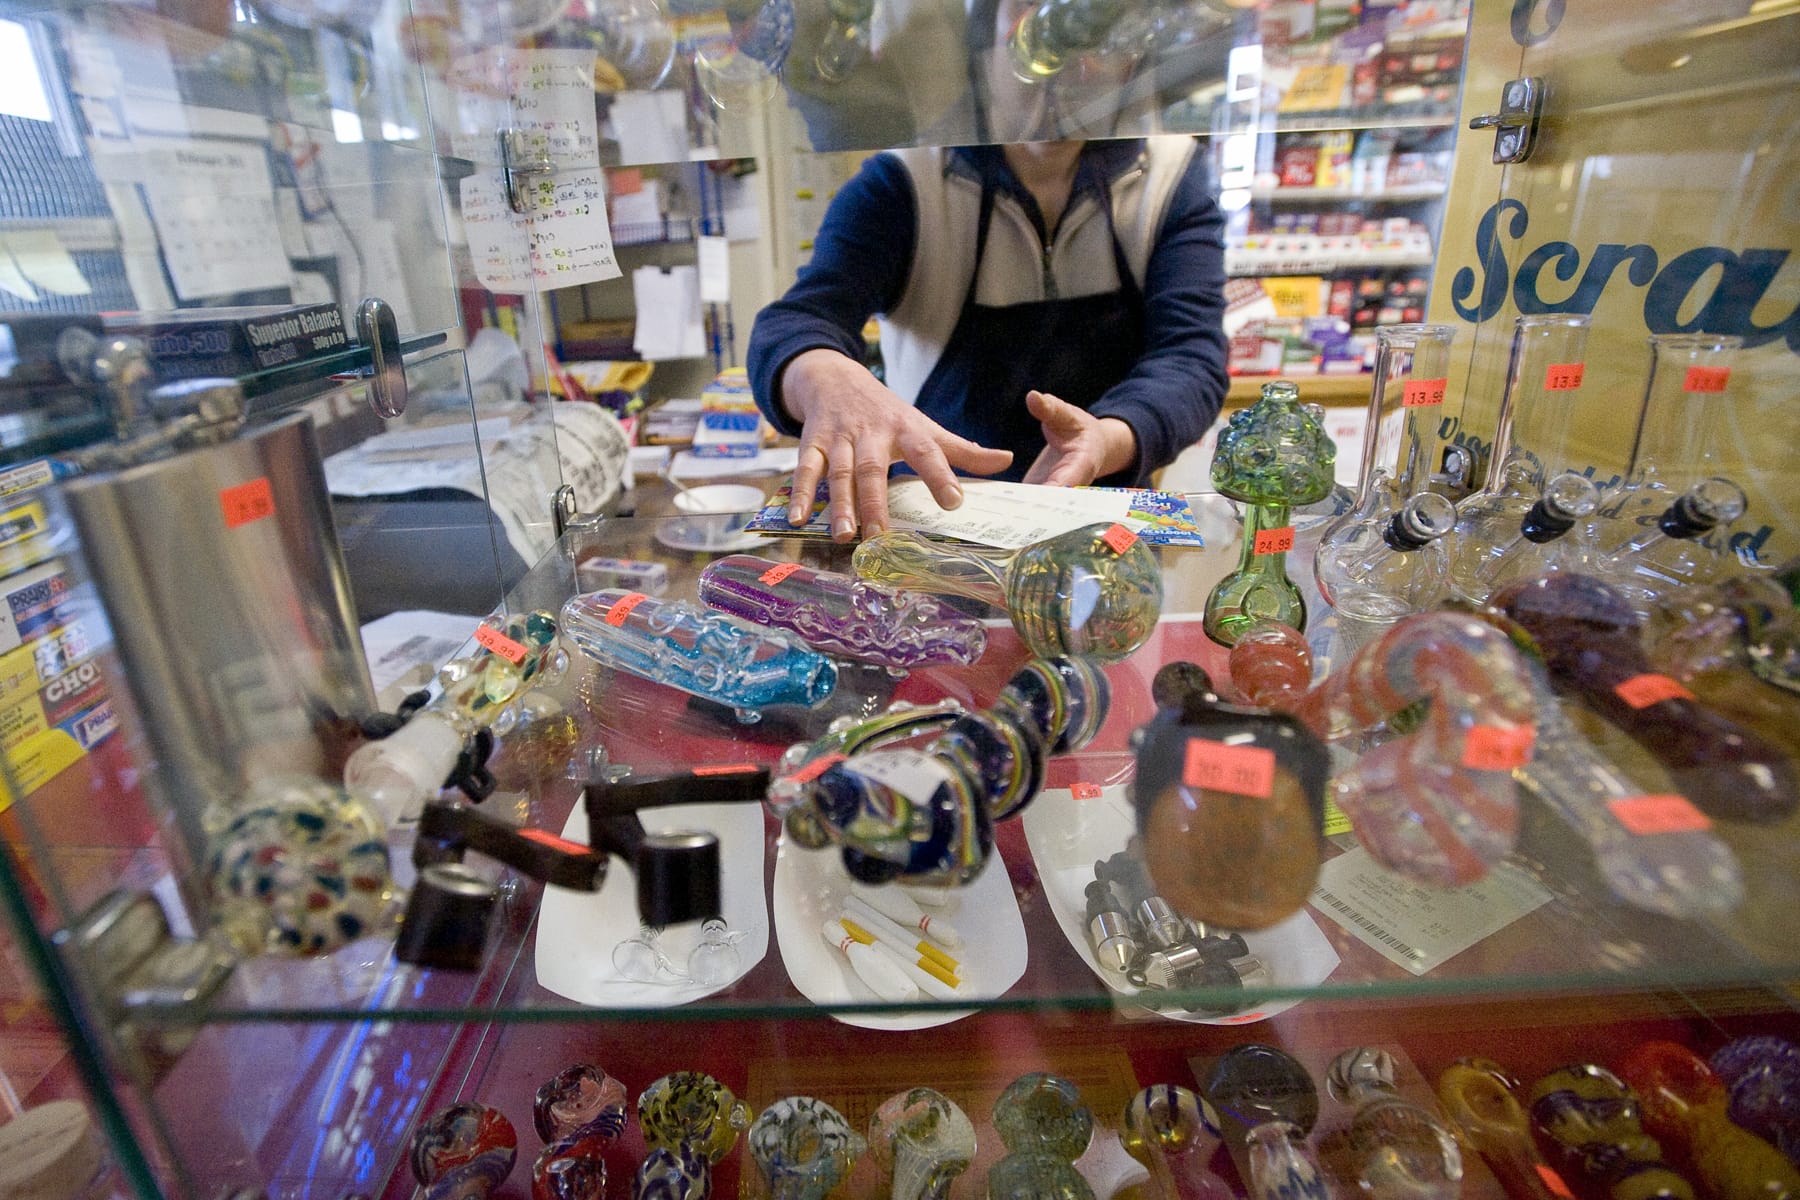 Glass smoking pipes, such as these photographed in 2011, will not be allowed in areas open to minors under a new Vancouver law.